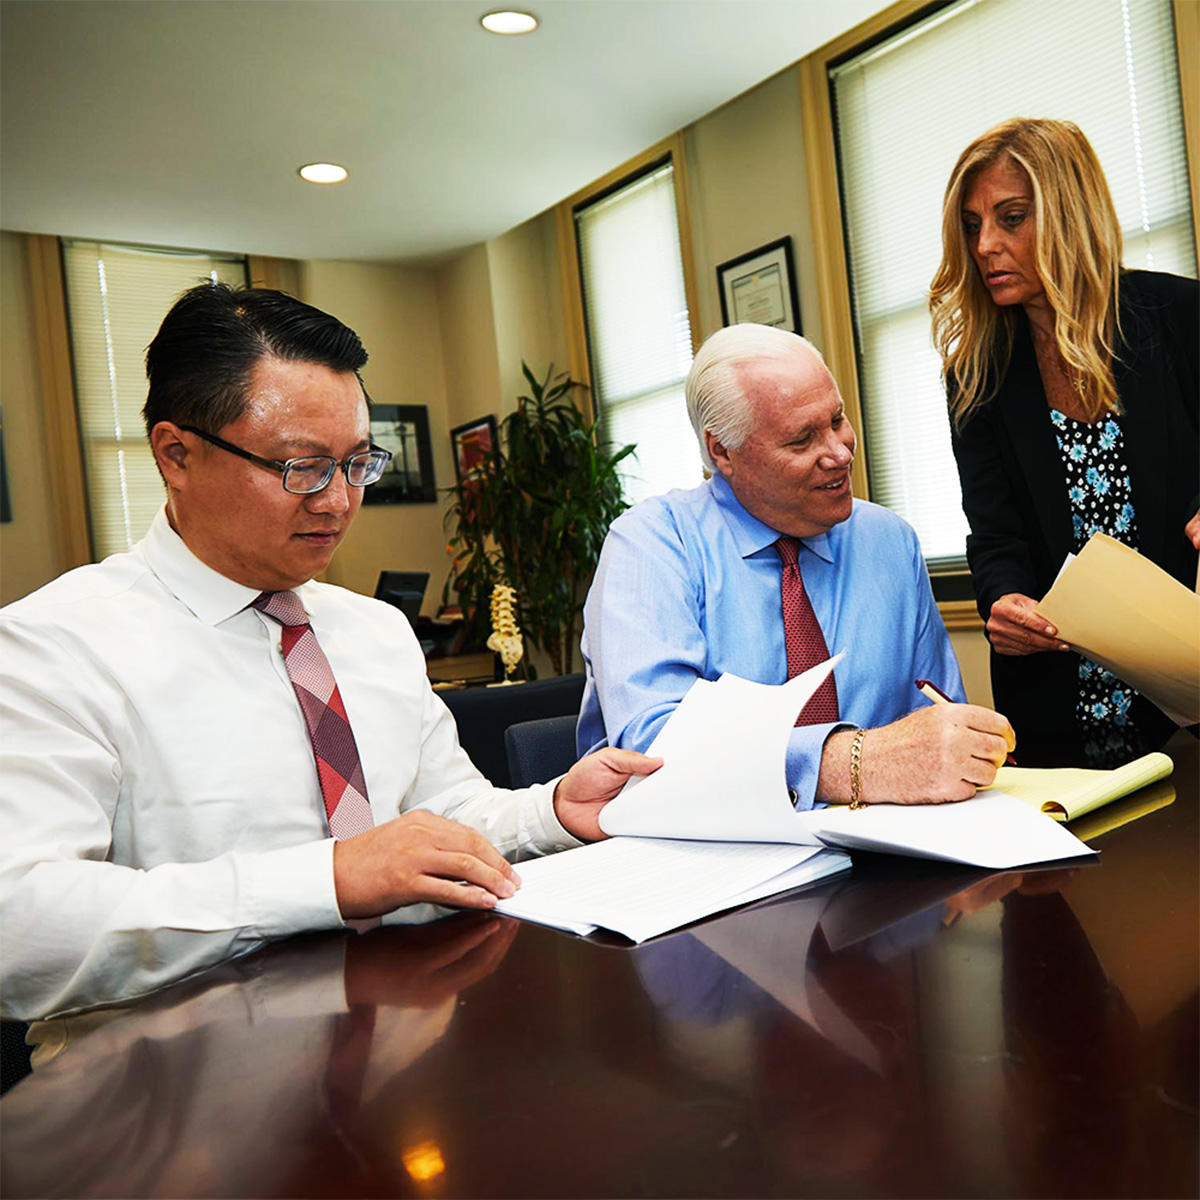 Our Bronx injury lawyers are dedicated to addressing your personal injury needs. If you or a loved one has been the victim of a motor vehicle accident, medical malpractice, construction or labor-related accident, wrongful death, catastrophic injury or other type of negligence, then contact our lawyers at Queller, Fisher, Washor, Fuchs & Kool And The Law Office Of William A. Gallina, LLP.